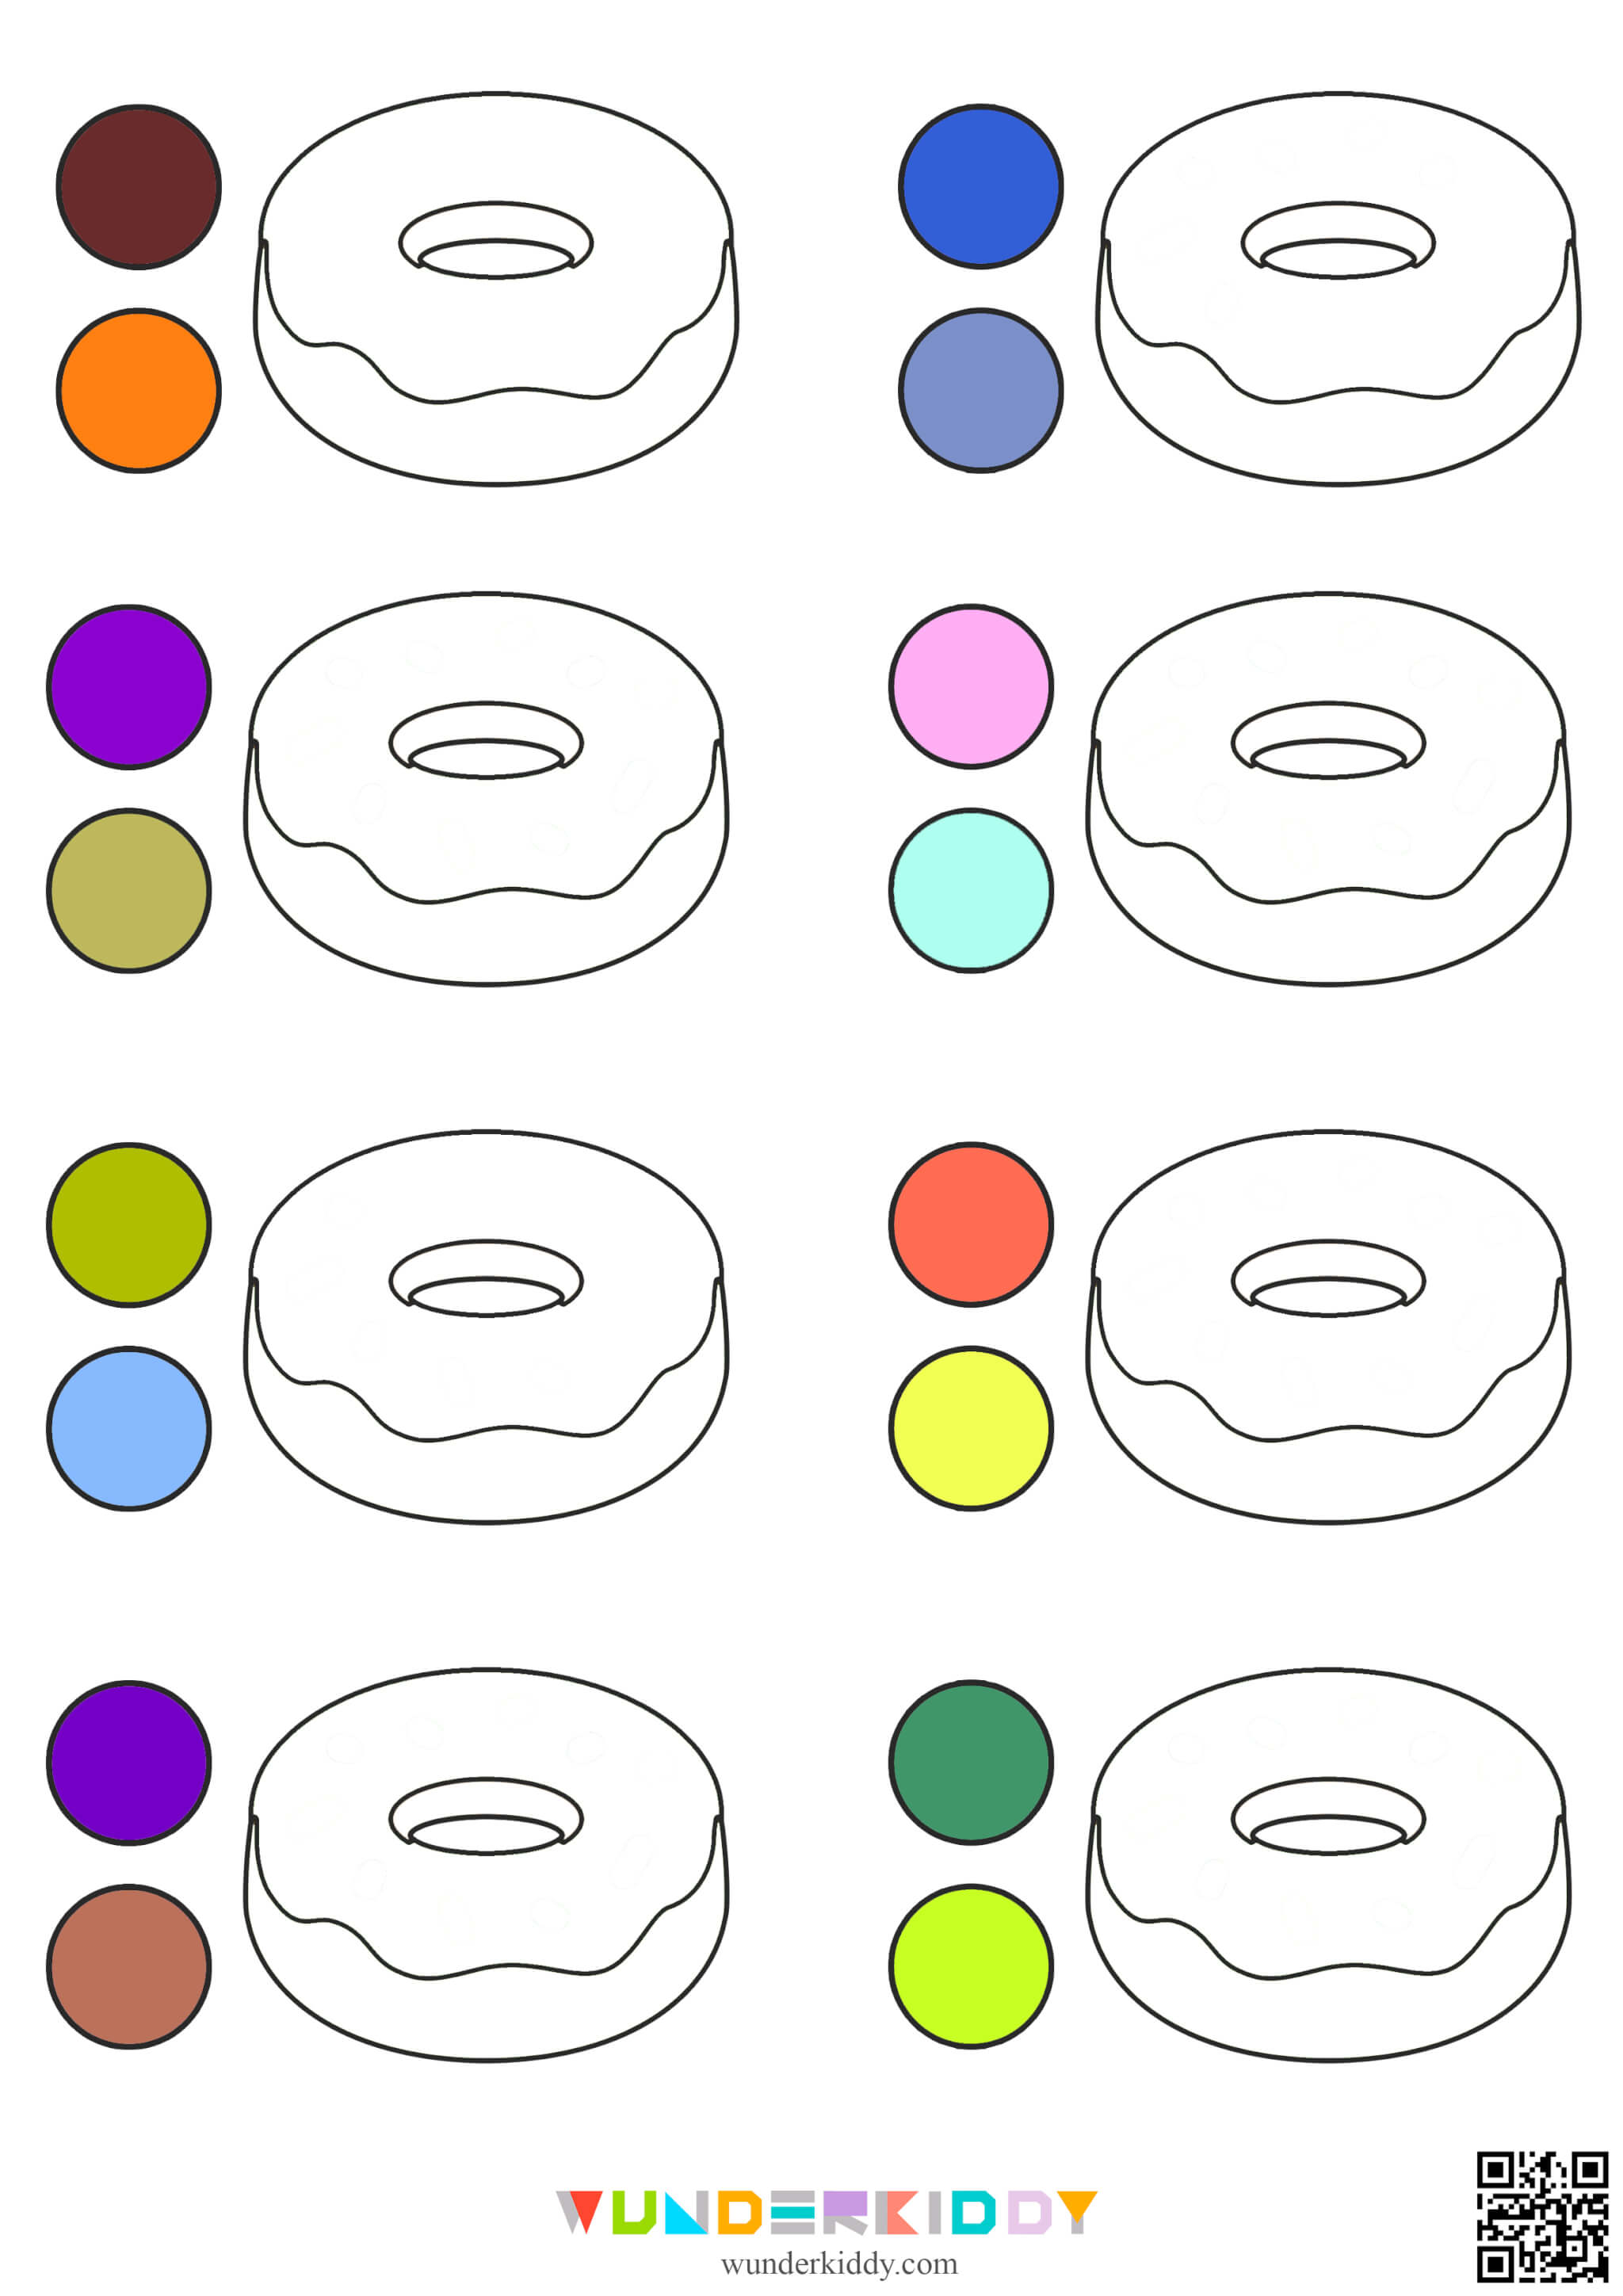 Donuts Color Matching Activities for Toddlers - Image 3